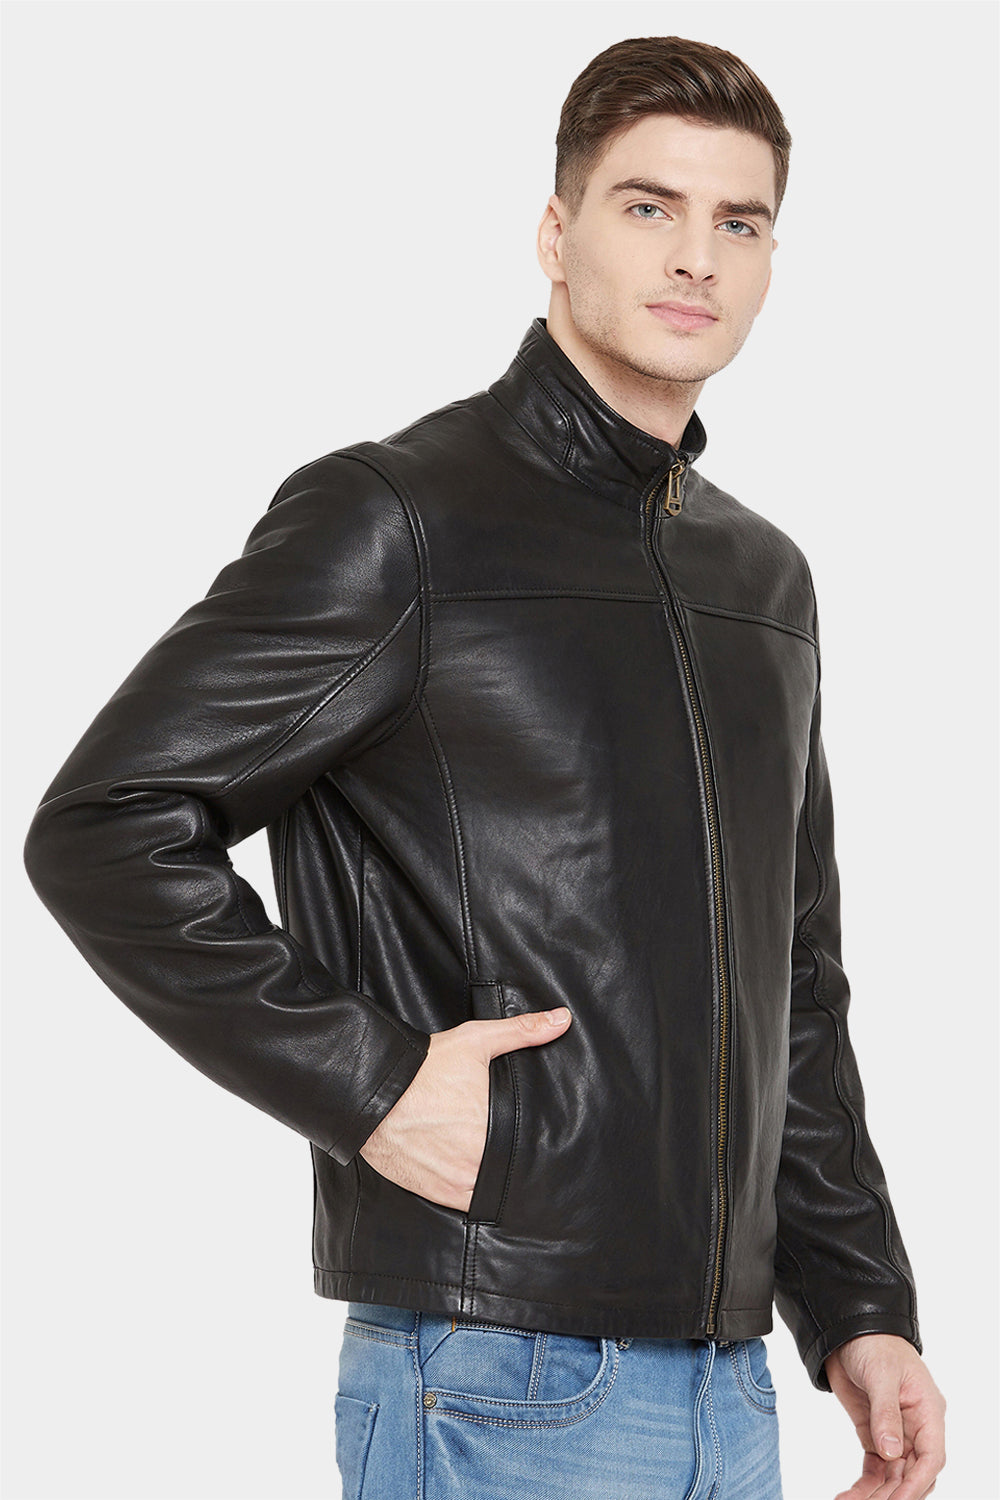 New Zealand Genuine Real Leather Jacket – Justanned